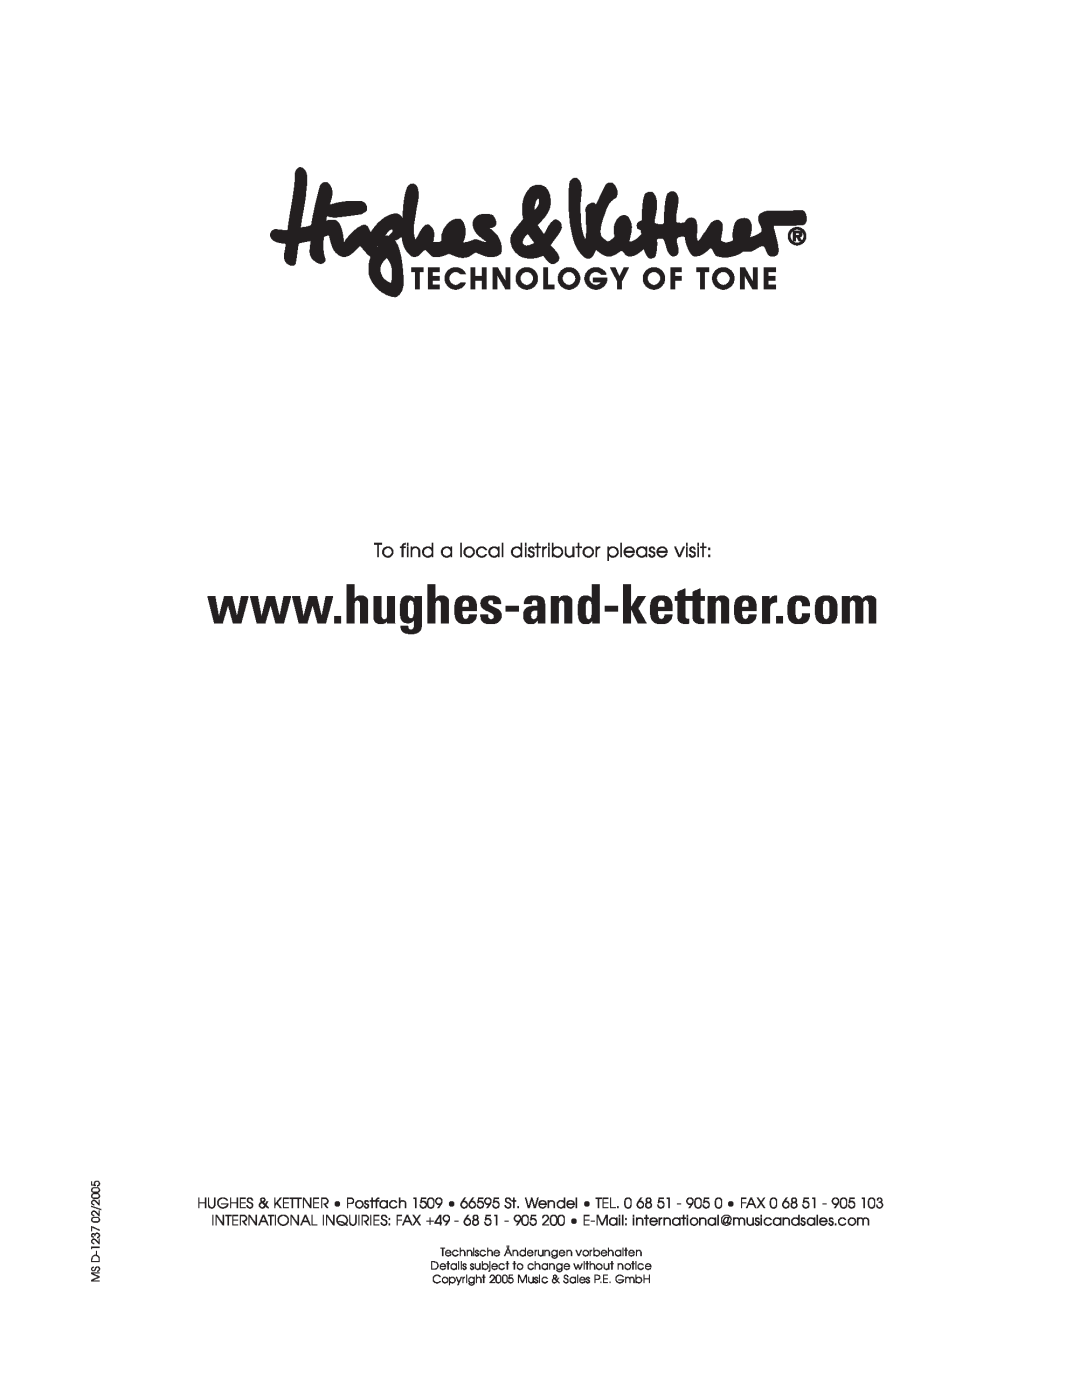 Hughes & Kettner Tape Delay Simulator manual To find a local distributor please visit, MS D-123702/2005 